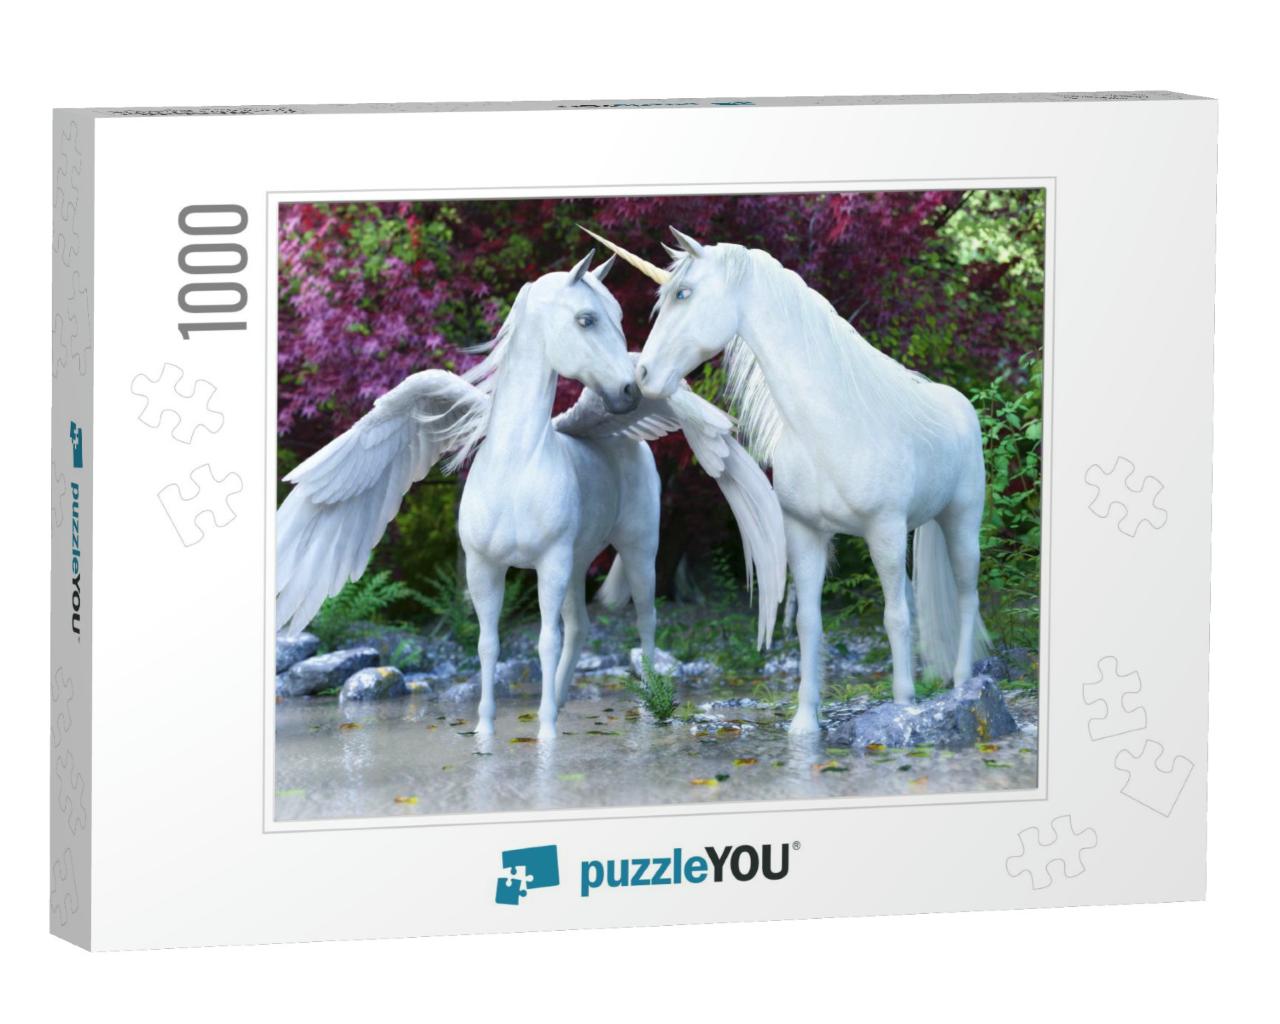 Fantasy Mythical White Unicorn & Pegasus in an Enchanted... Jigsaw Puzzle with 1000 pieces